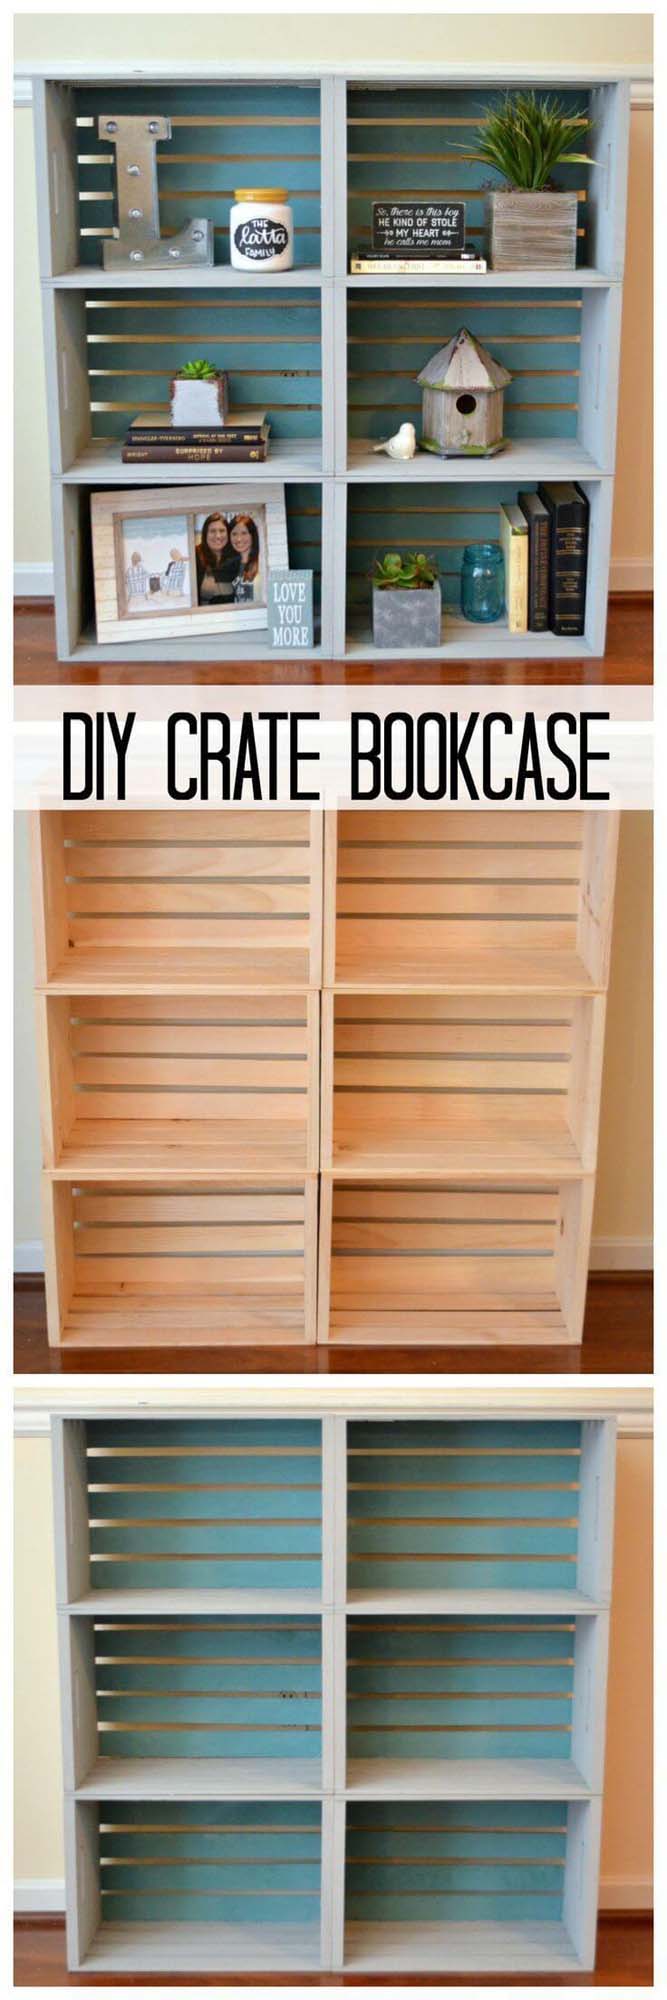 How to Build a Crate Bookcase #homedecor #hacks #decorhomeideas